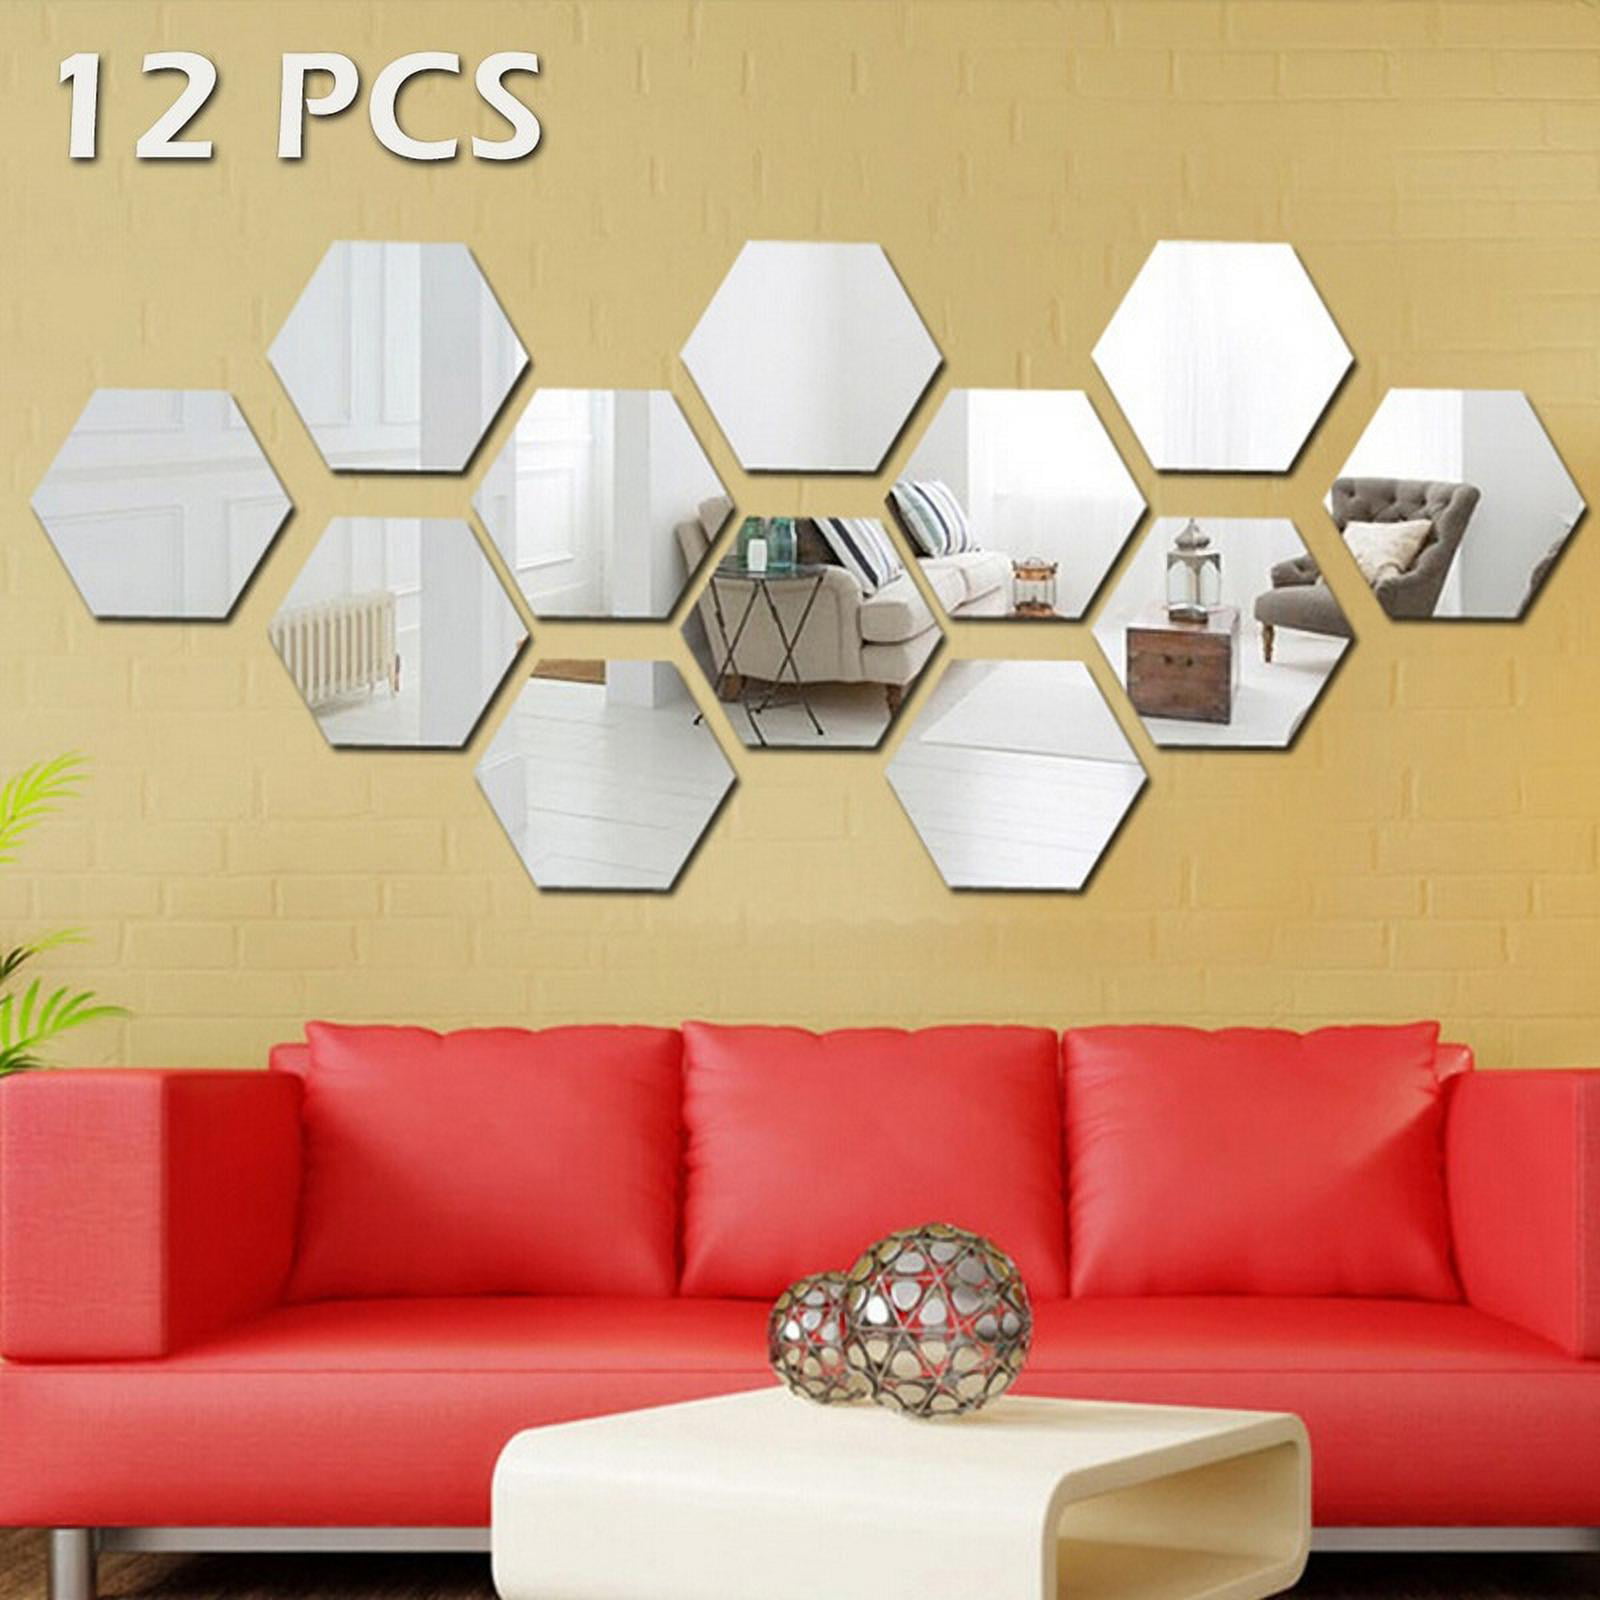 Frames DIY Mirror Surface Wall Sticker Crystal Home Dé Cor Bedding Room  Living Room Decoration - China Large Wall Sticker, Mirror Wall Stickers